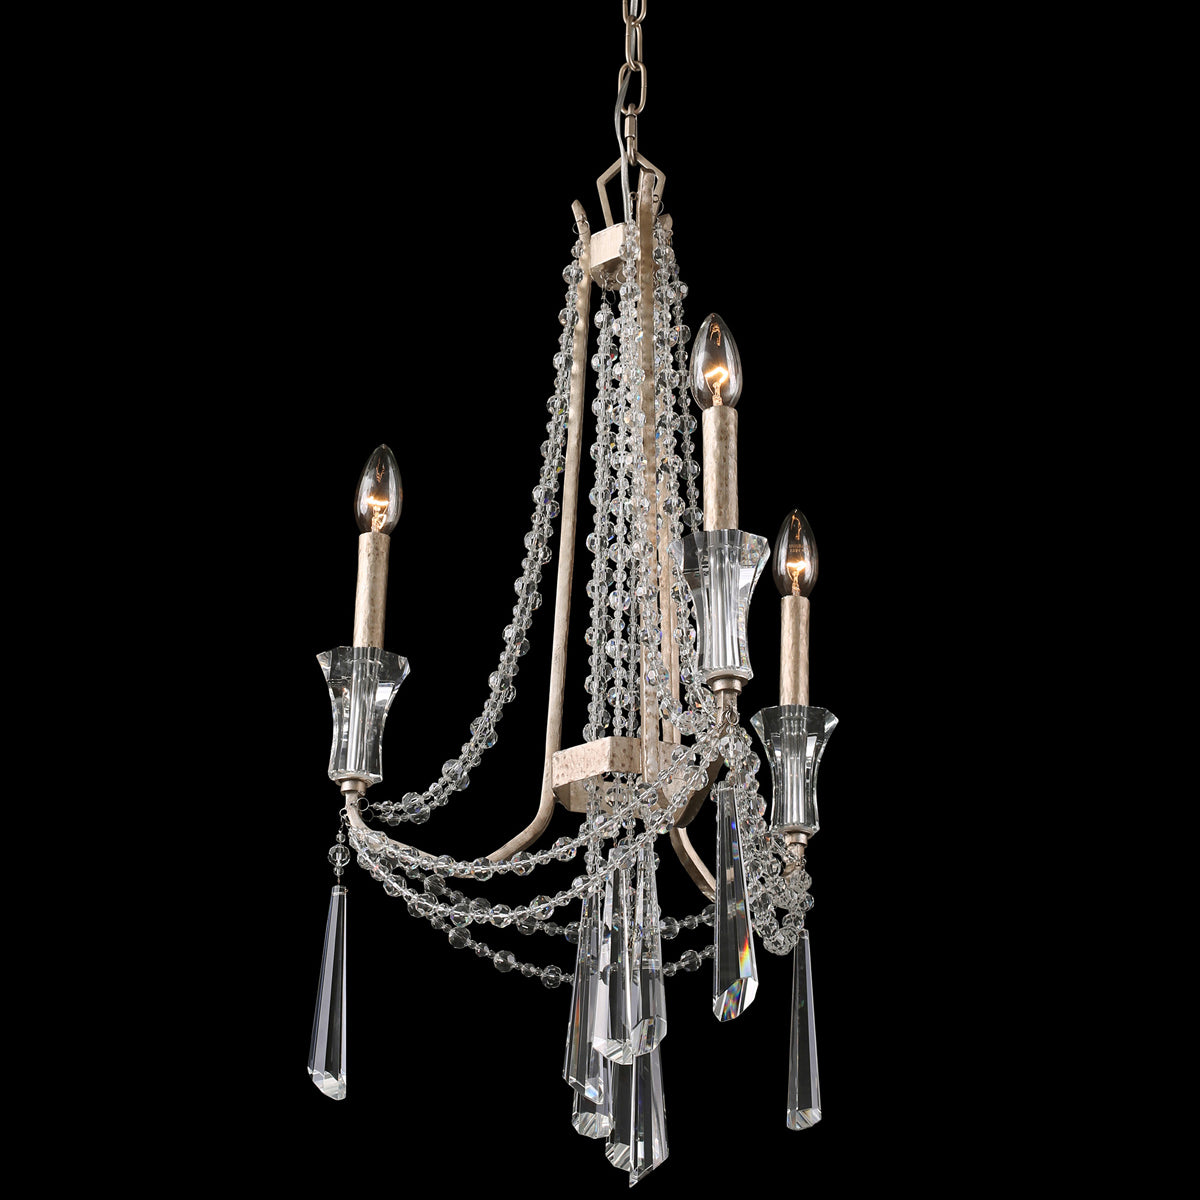 Barcelona 3-Light Chandelier in Transcend Silver with Heirloom-Quality Optic Crystal - Lamps Expo